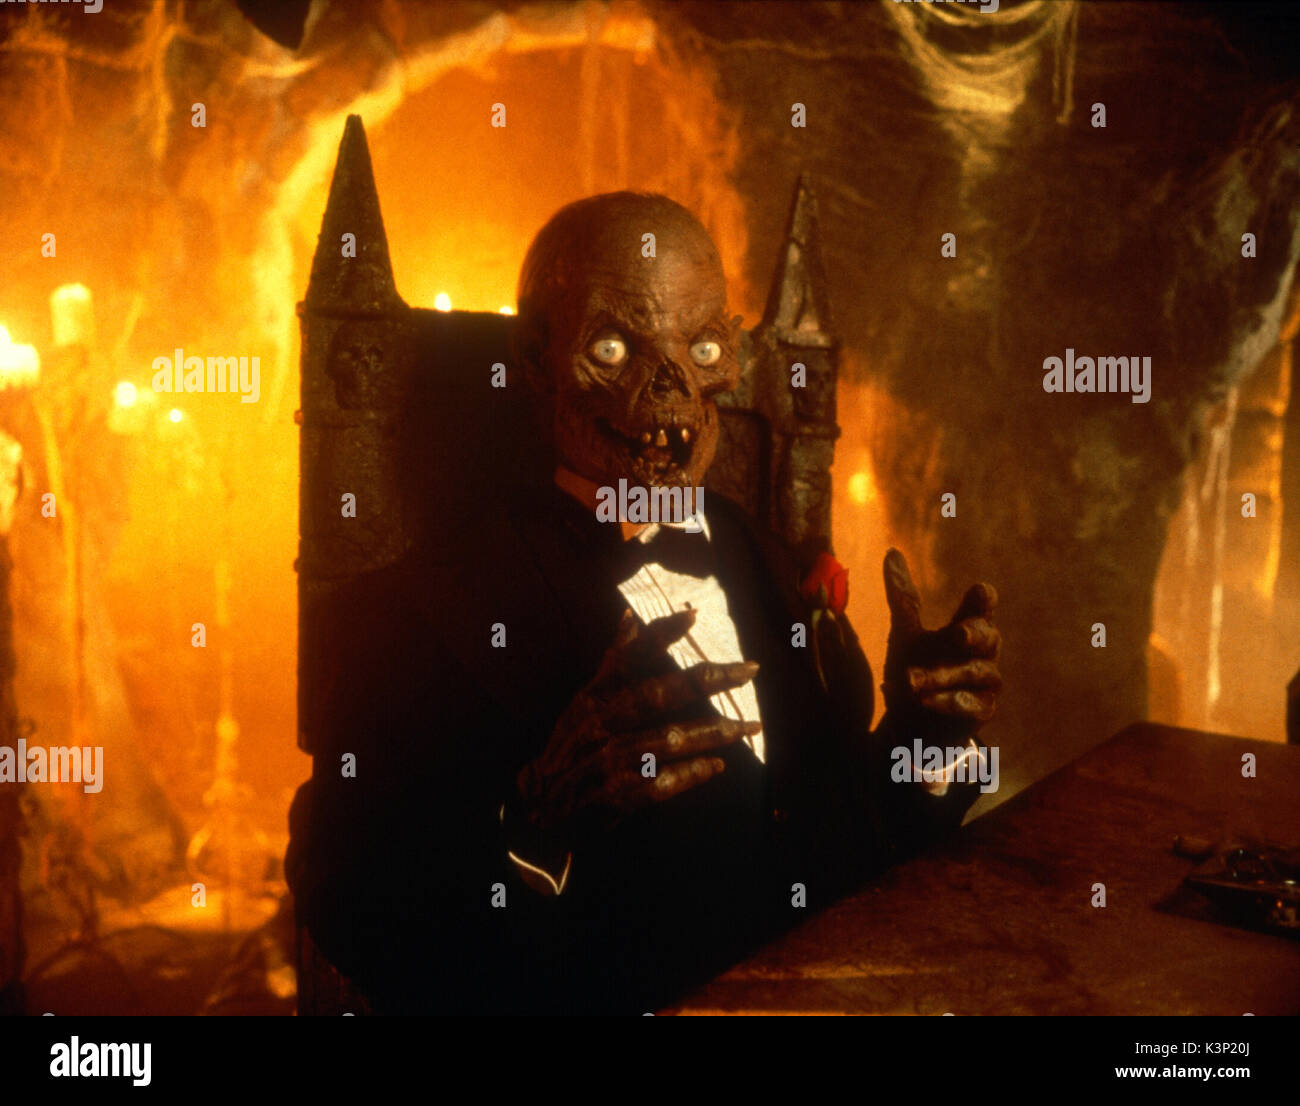 TALES FROM THE CRYPT [Série TV US 1989 - 1996] Date : 1996 Banque D'Images